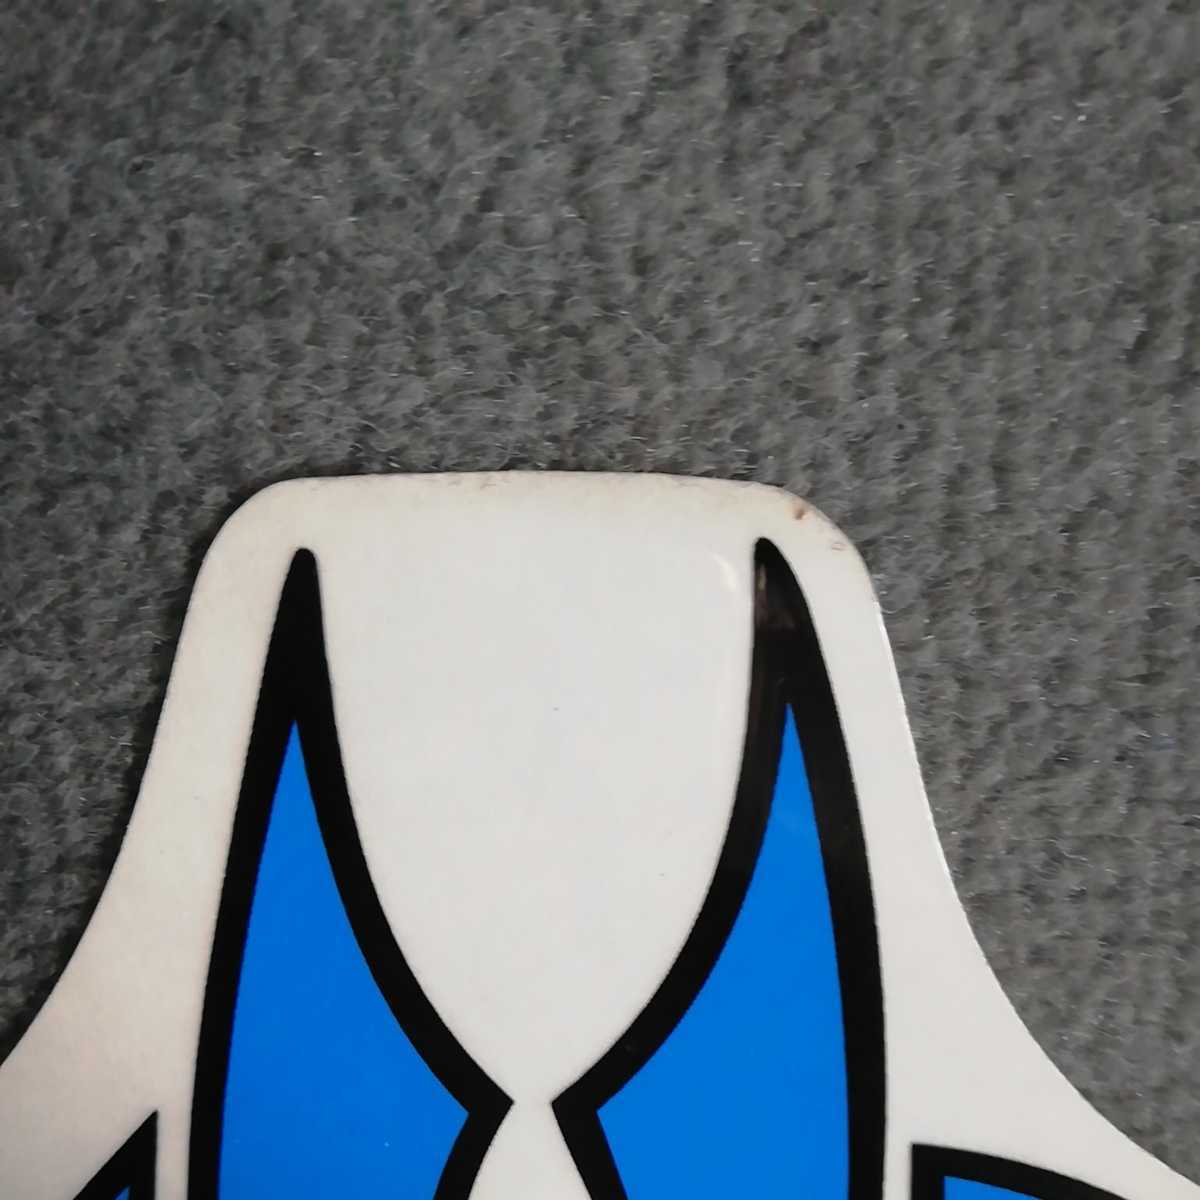  new goods unused regular goods genuine article manta limitation extra-large sticker blue / black . taking . width some 30cm length some 17.8cm surface coating thickness .B postage Y230~